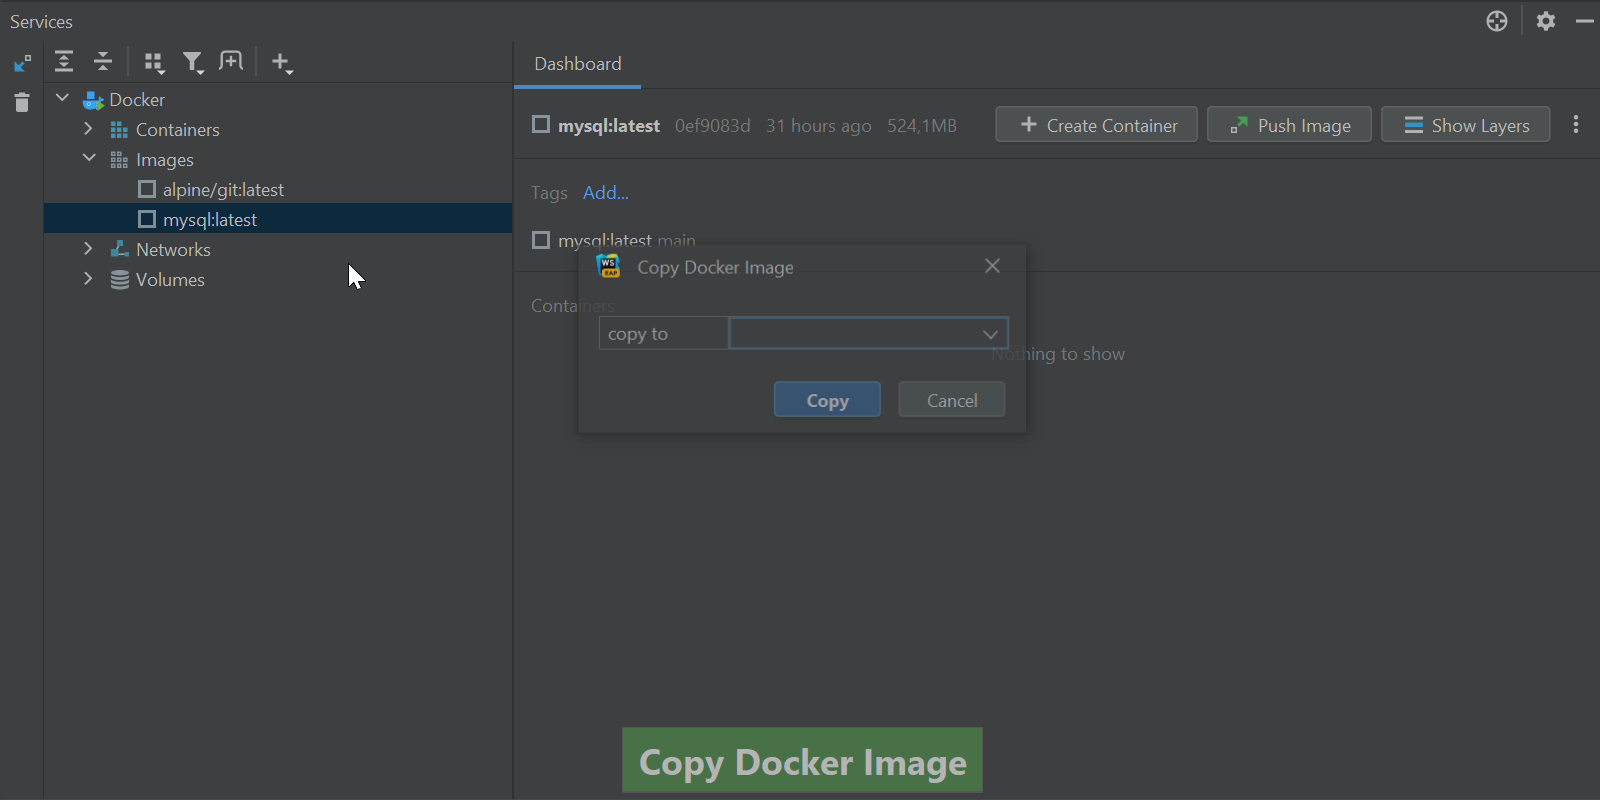 Copy Docker images and add to another connection